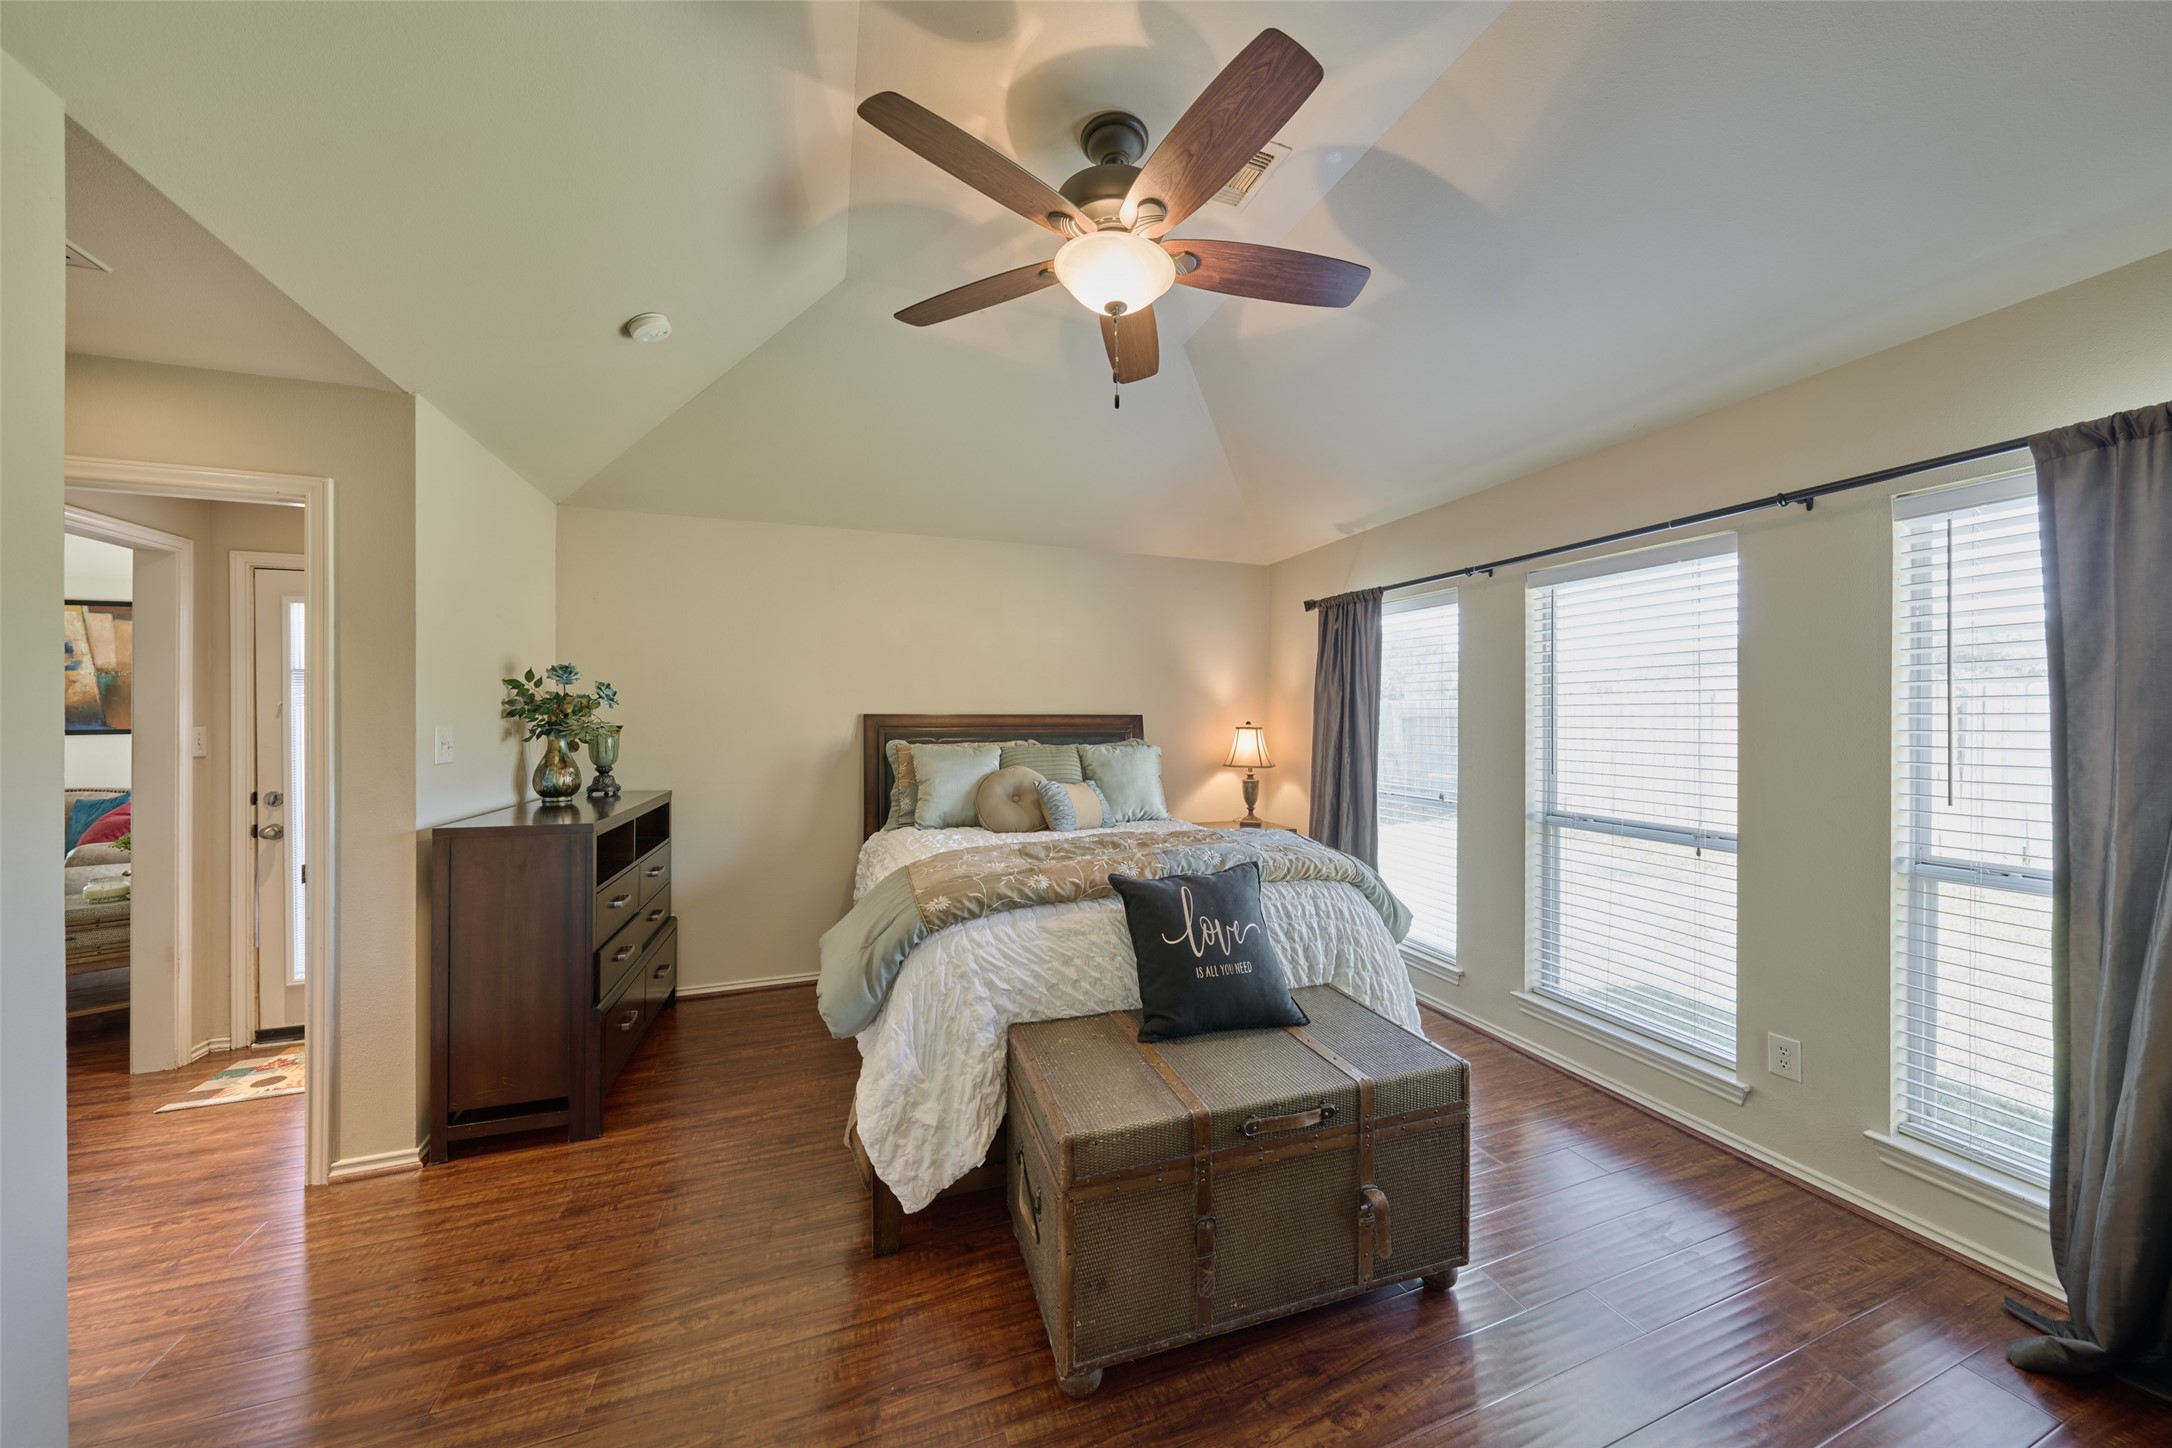 Laminate wood flooring carries from the family room into the primary bedroom. Serene and peaceful the room has a wall of windows and high ceiling.